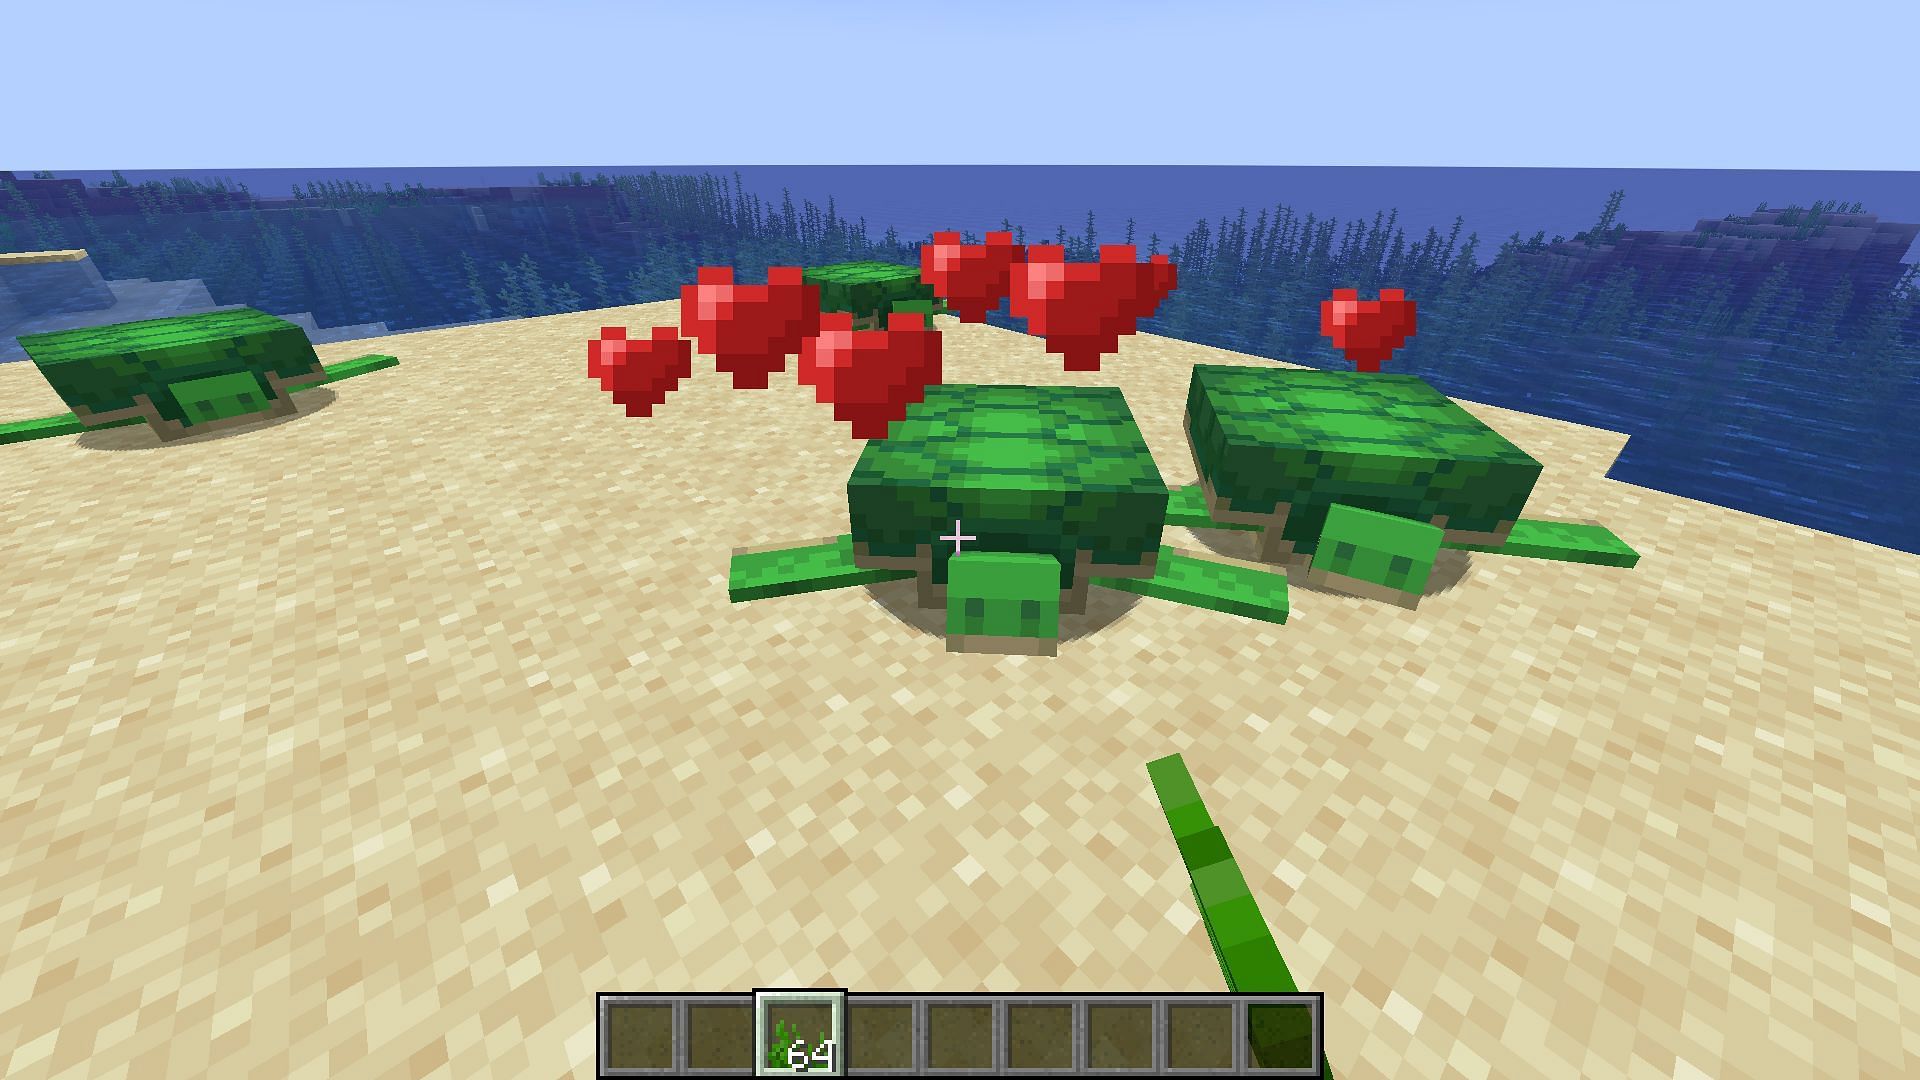 Turtles eat seagrass to start breeding with each other in Minecraft (Image via Mojang)